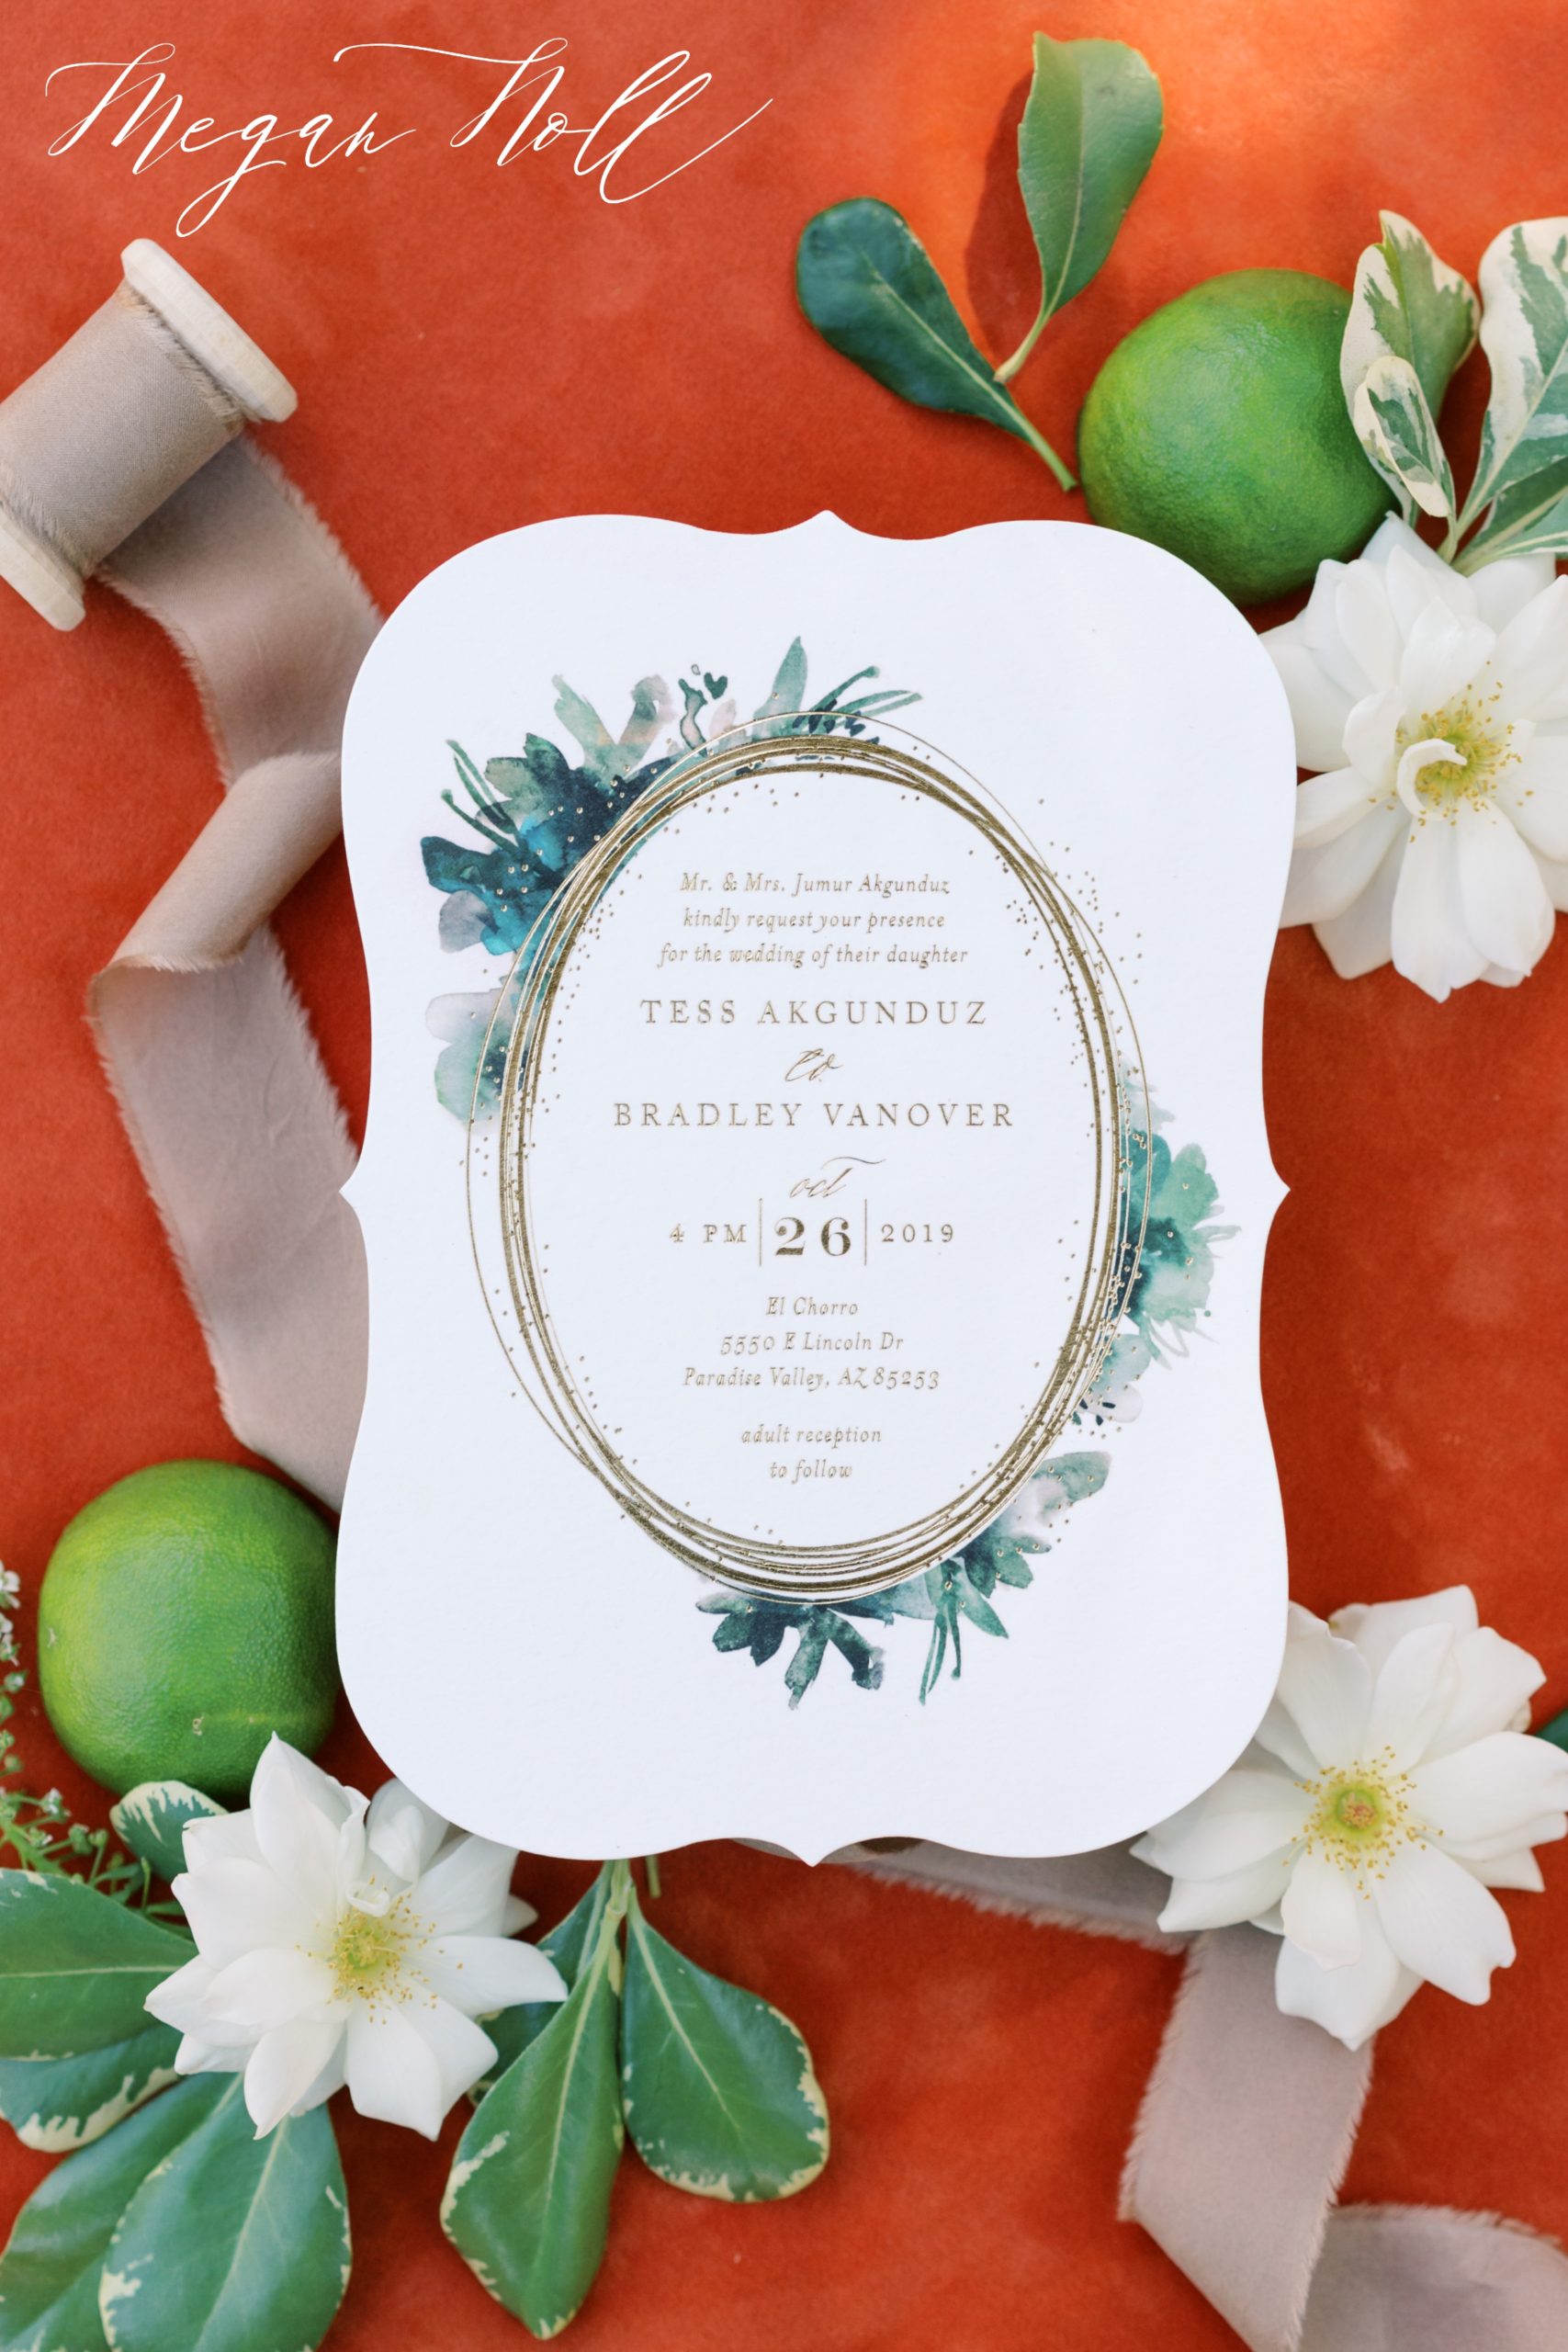 Wedding in Phoenix AZ with wedding invitations from Minted